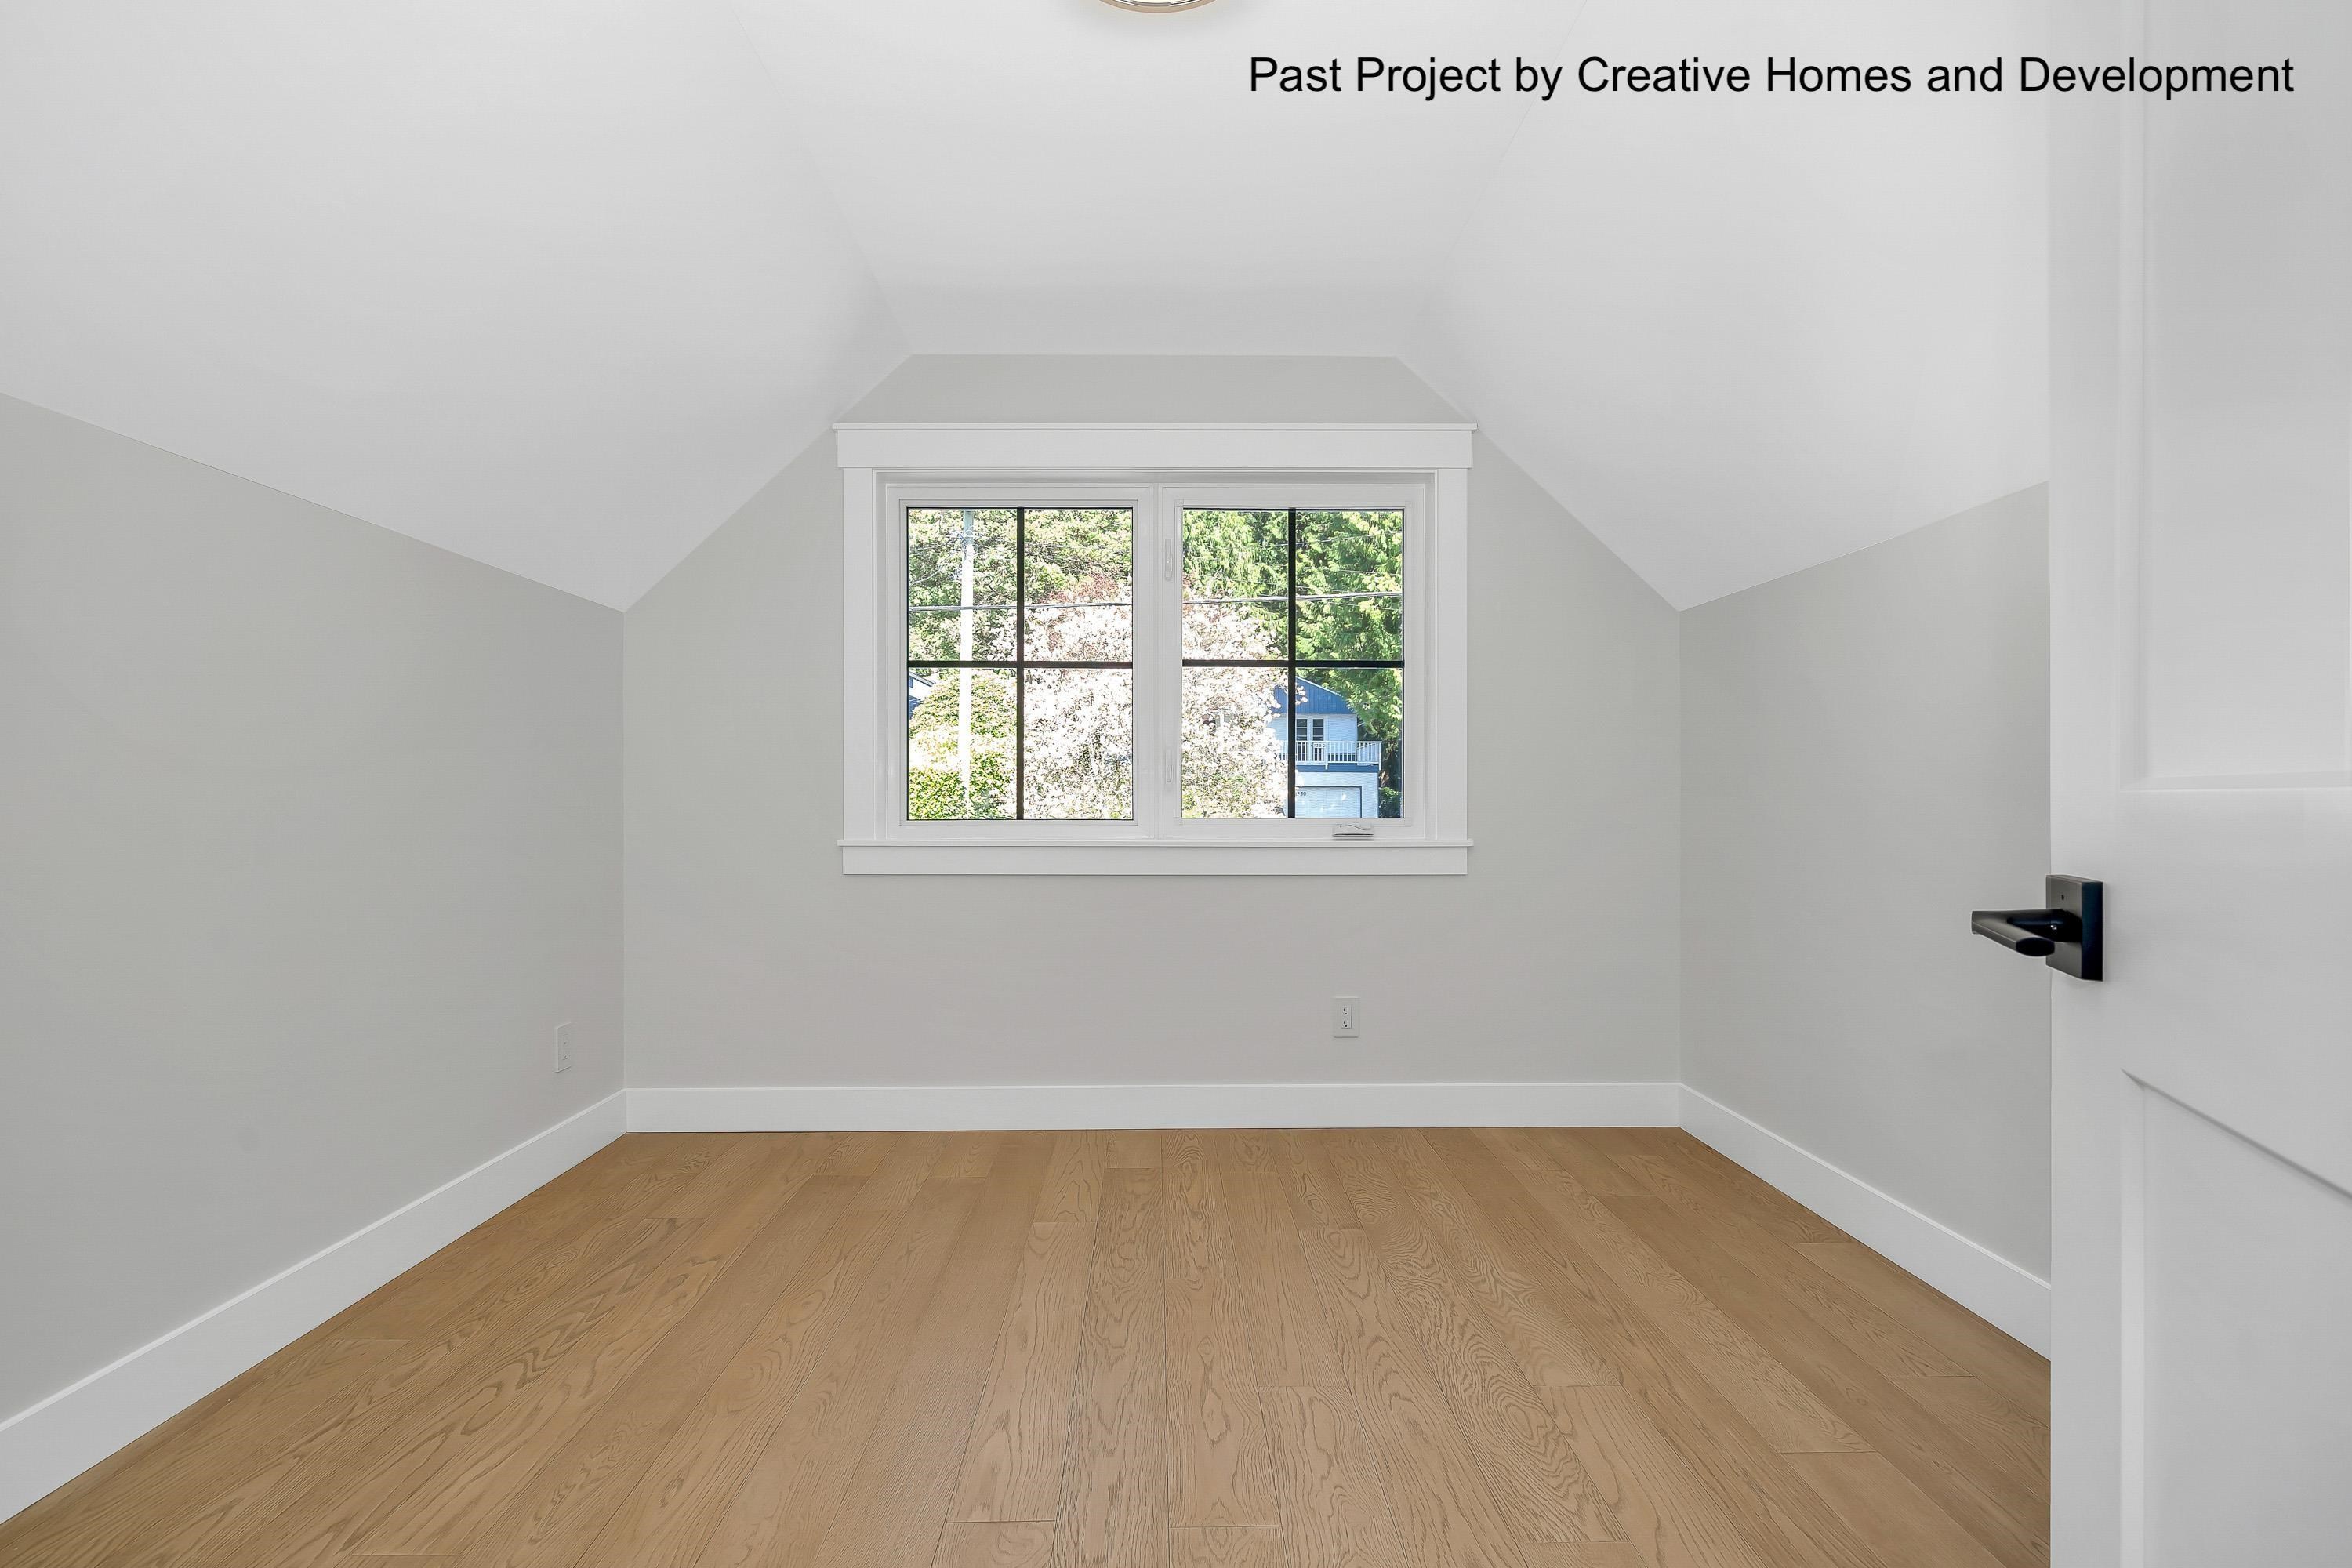 Listing image of 3031 FROMME ROAD